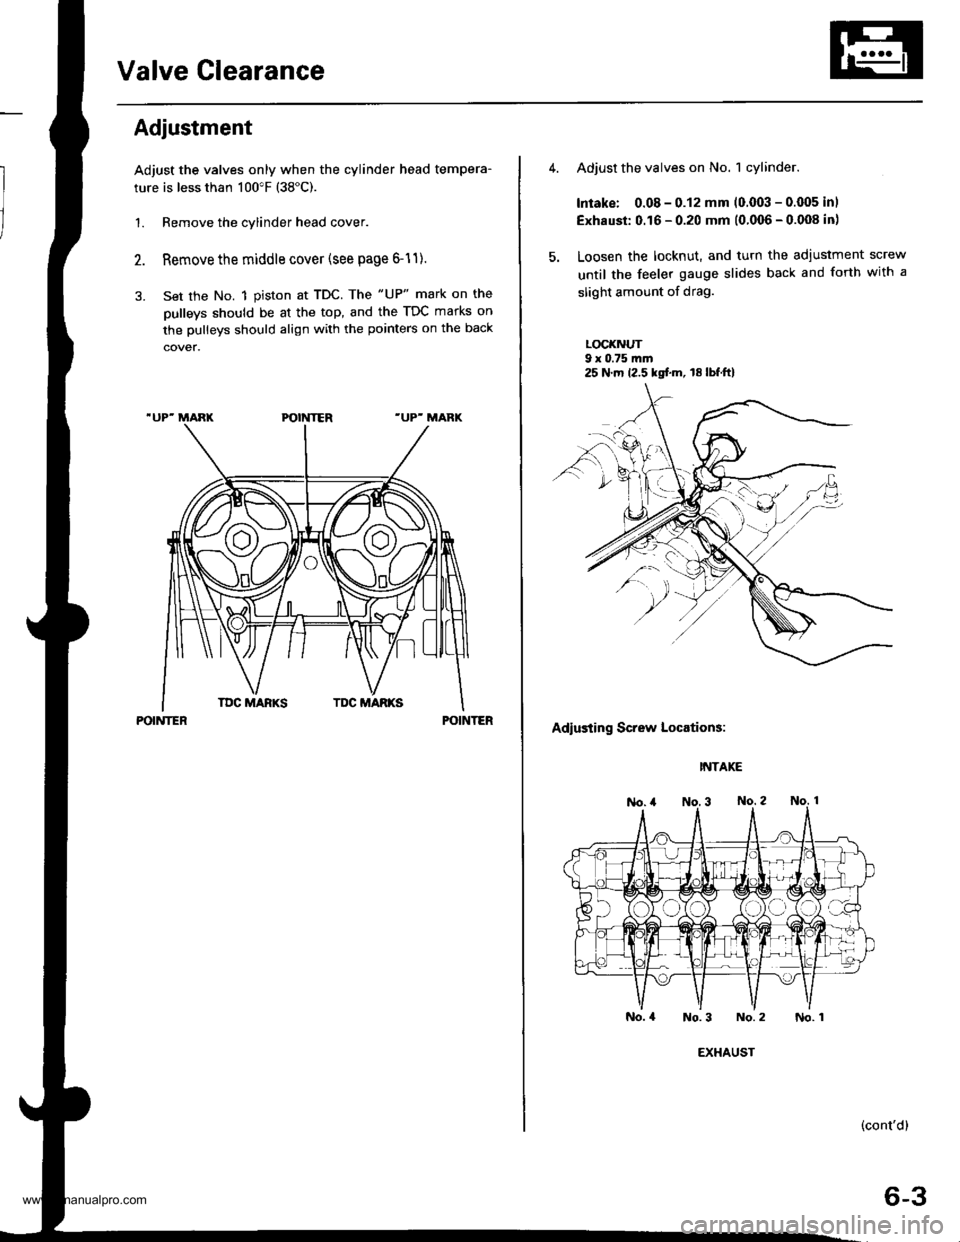 HONDA CR-V 2000 RD1-RD3 / 1.G Workshop Manual 
Valve Clearance
Adiustment
Adjust the valves only when the cylinder head tempera-
ture is less than 100"F (38"C).
1. Remove the cylinder head cover.
Remove the middle cover (see page 6-11).
Set the N